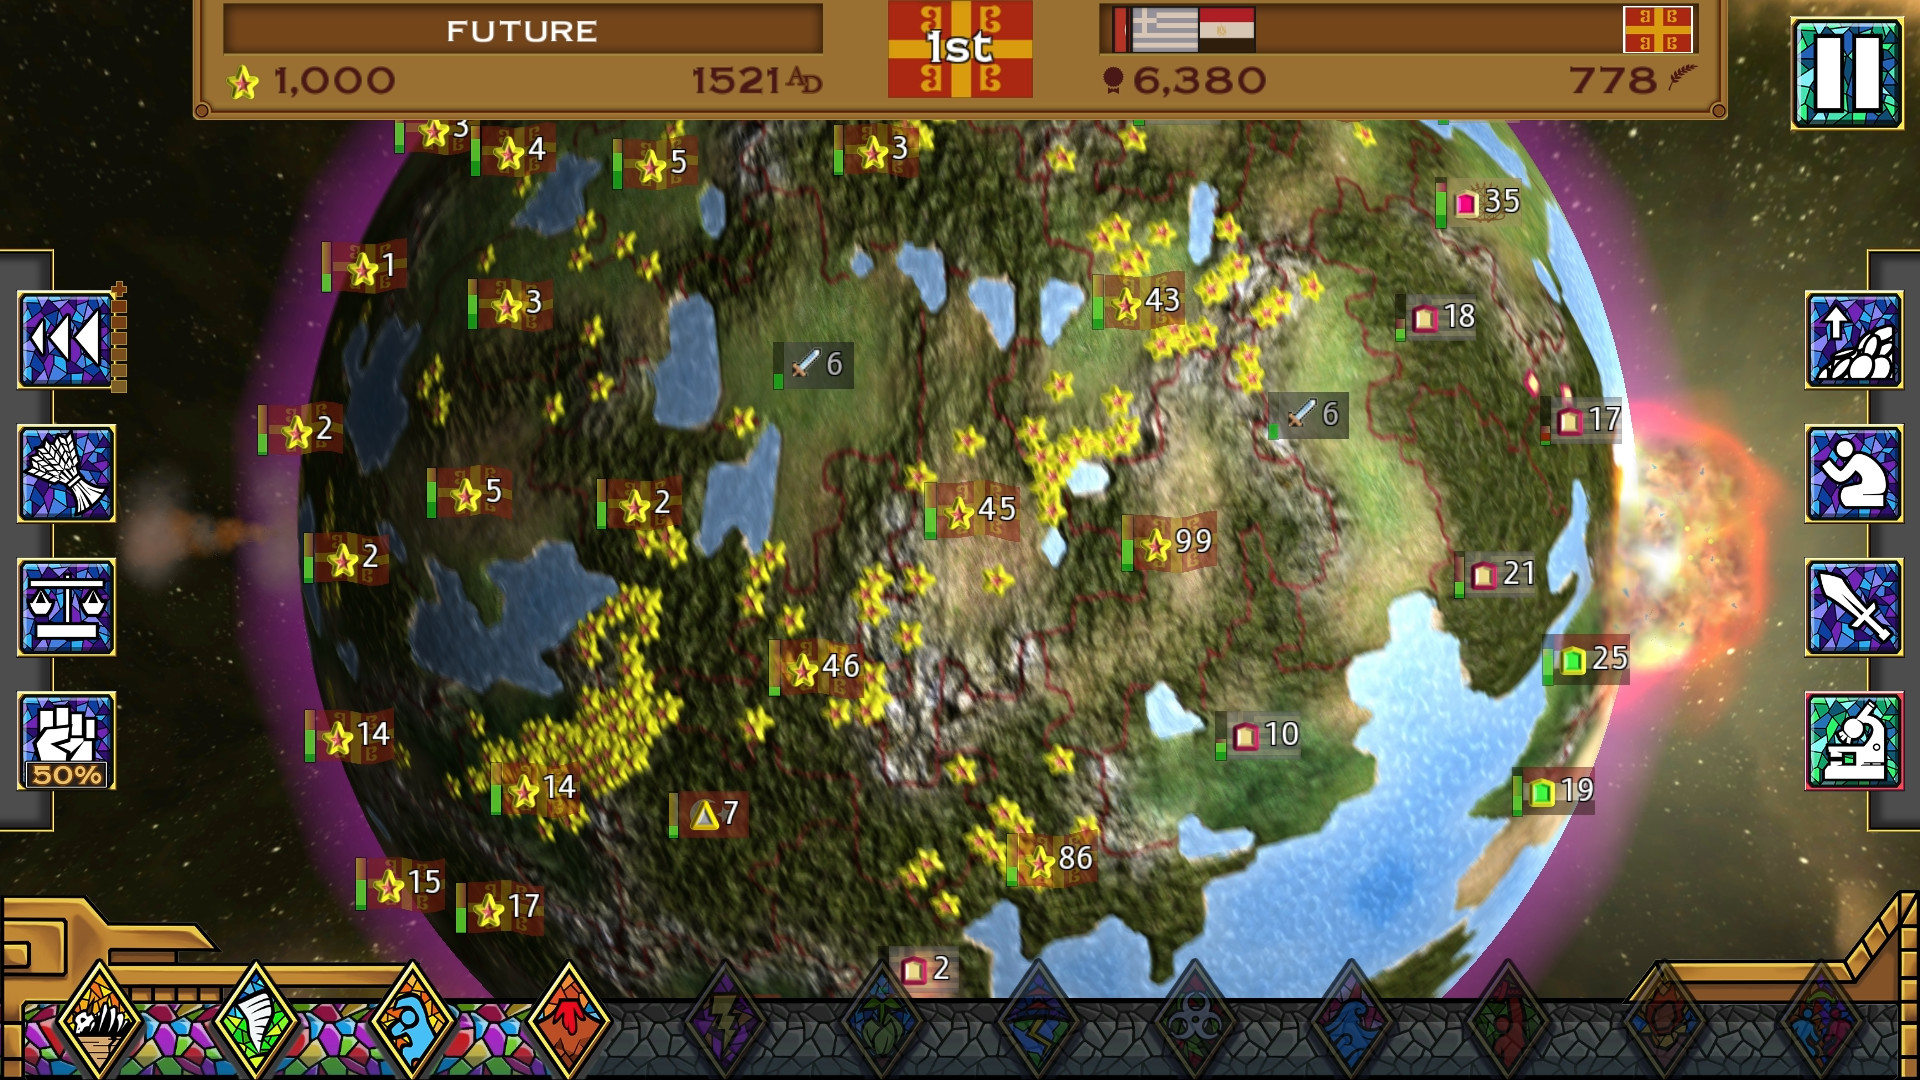 Rapture - World Conquest Apk Download for Android- Latest version 1.1.12-  com.tundragames.rapture_worldconquest